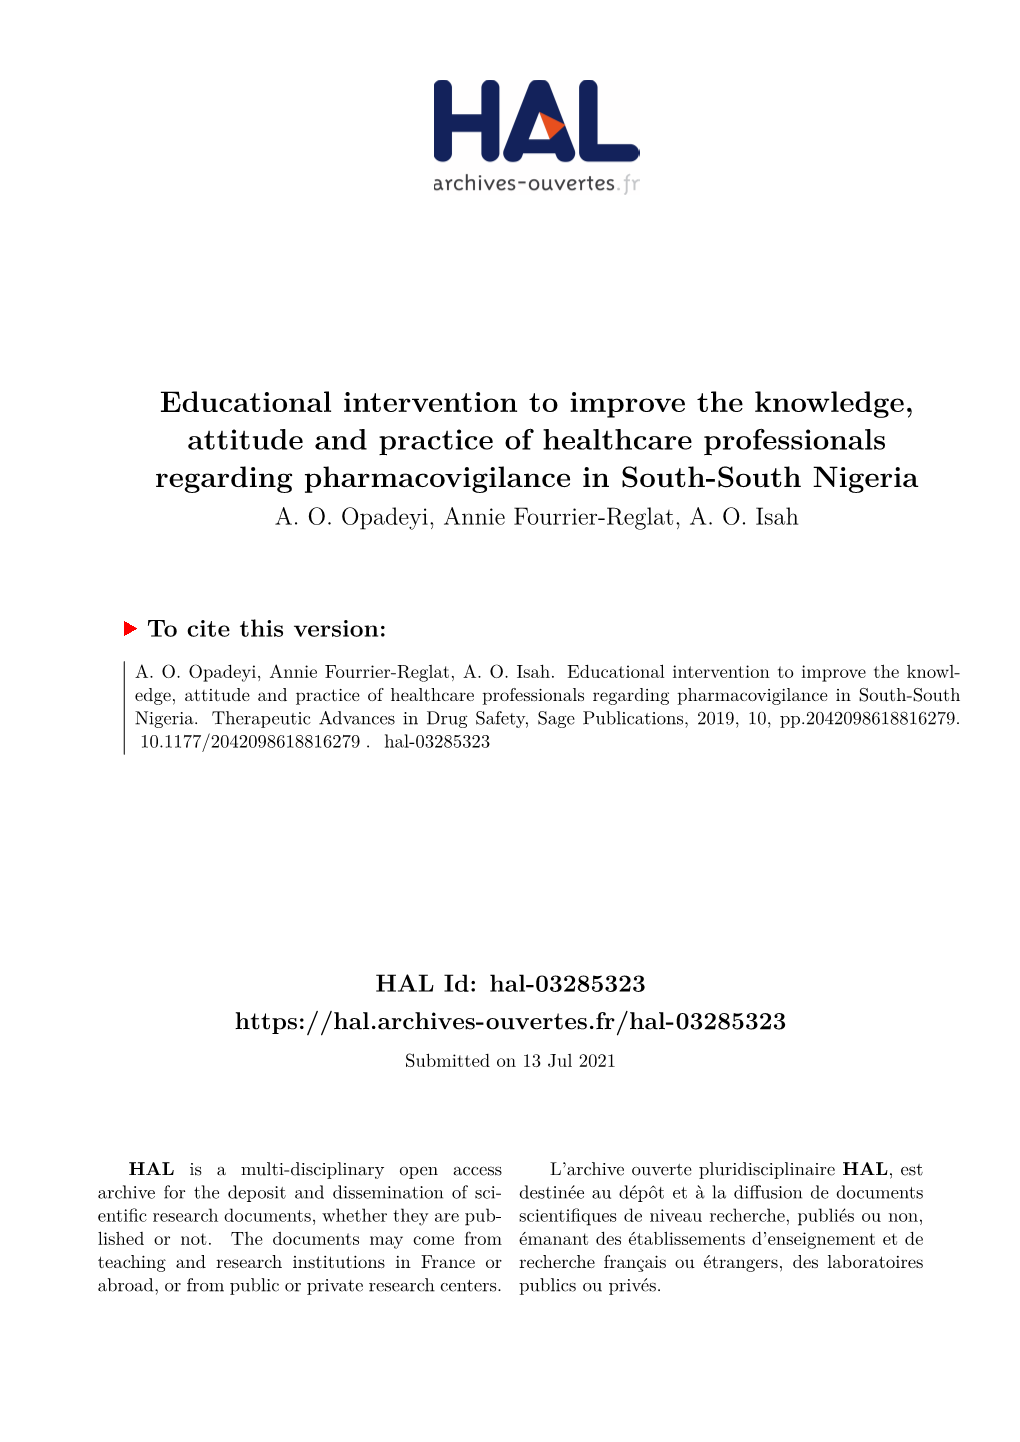 Educational Intervention to Improve the Knowledge, Attitude and Practice of Healthcare Professionals Regarding Pharmacovigilance in South-South Nigeria A